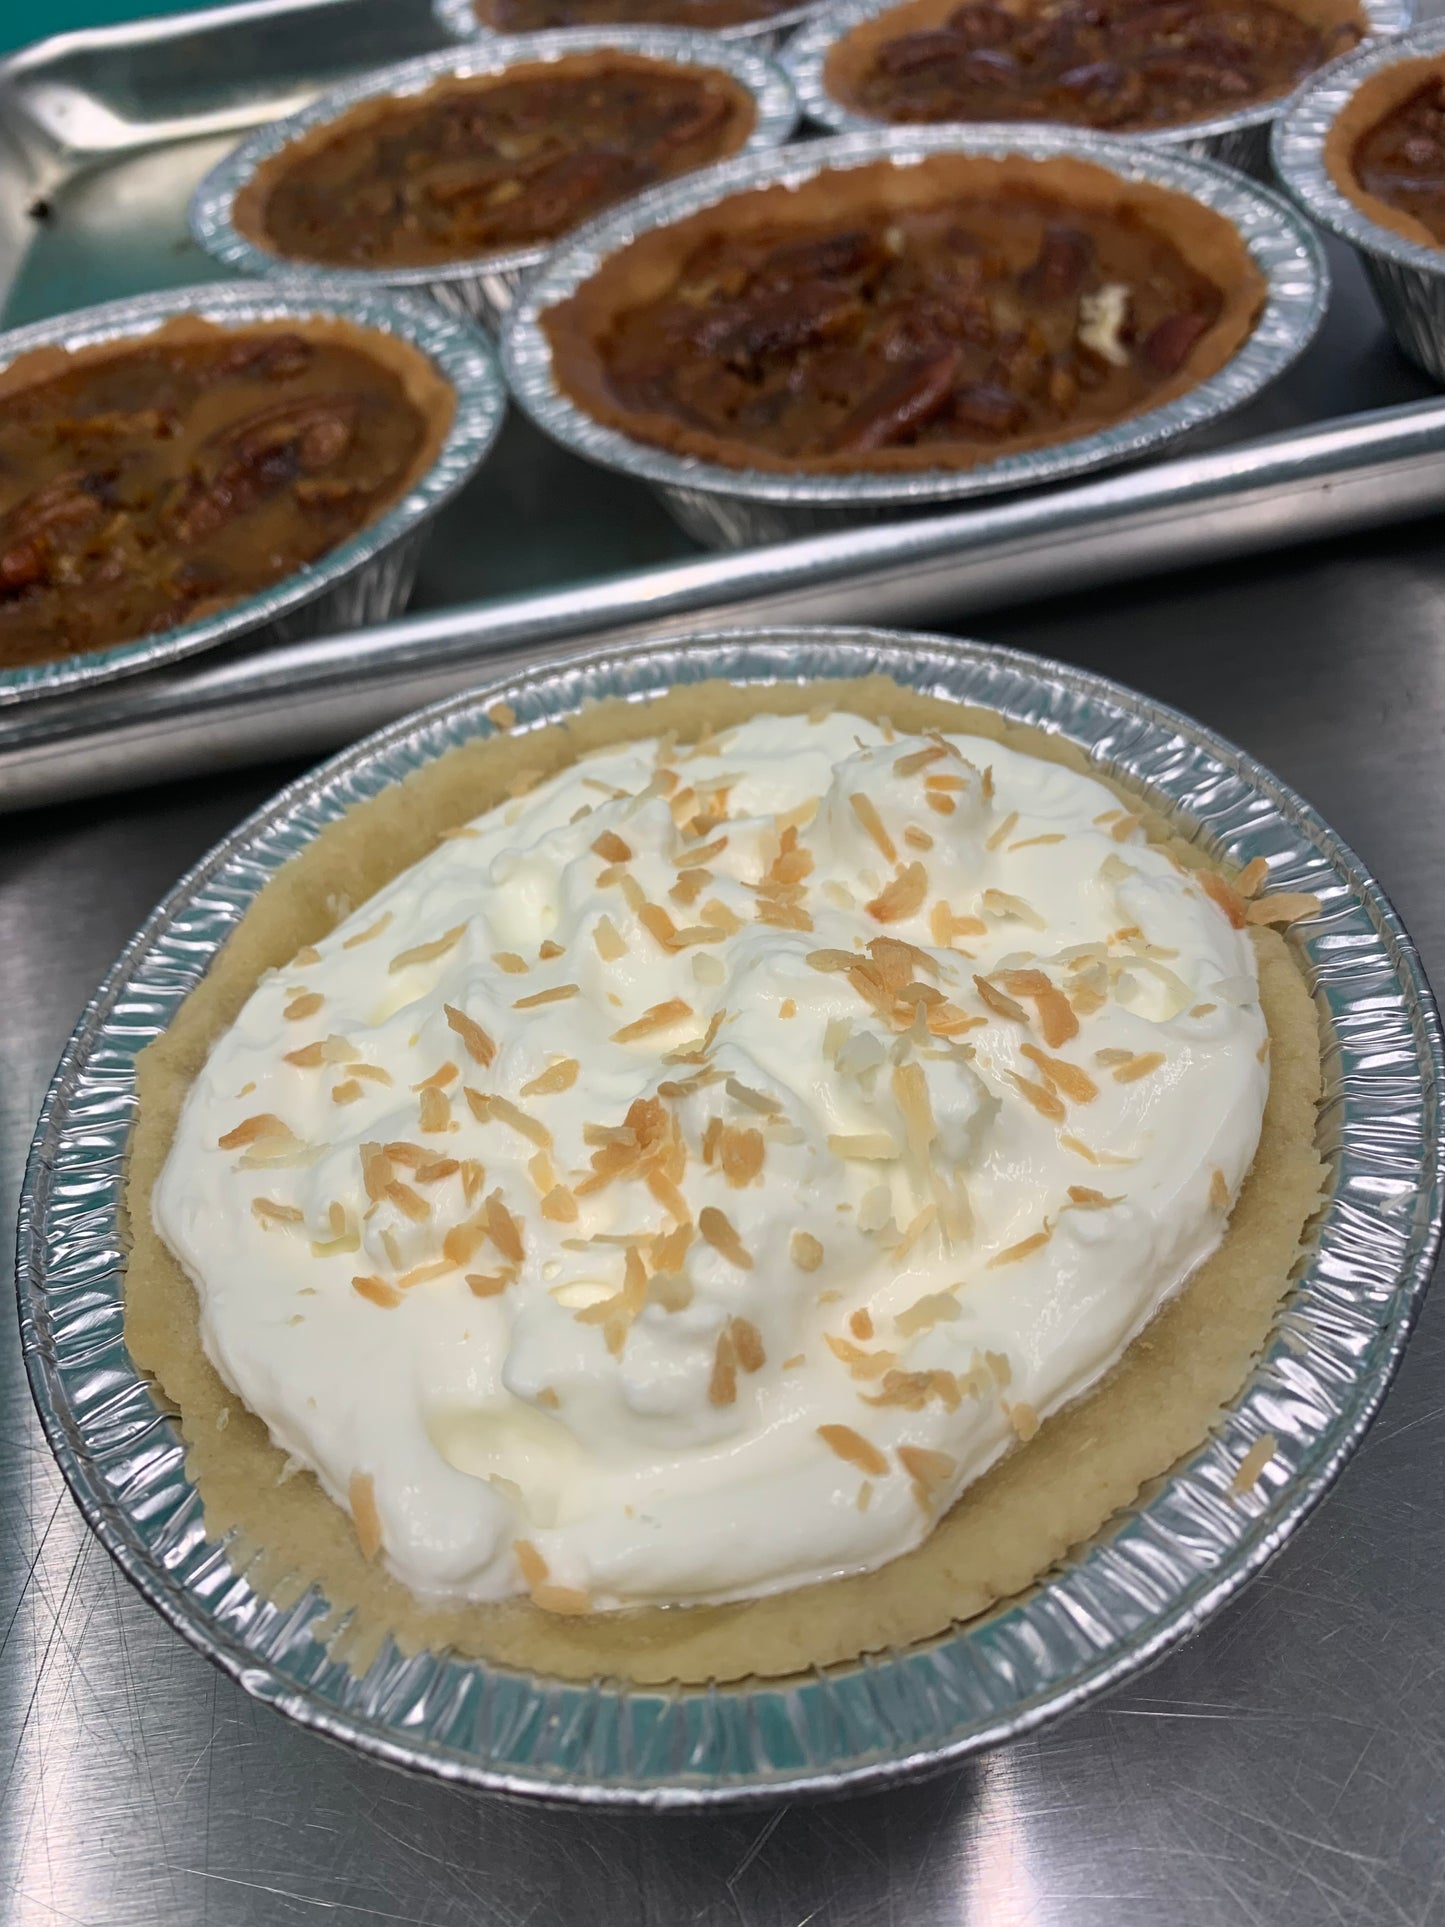 Keto Pies, Full Size, Pickup Only - SF, GF